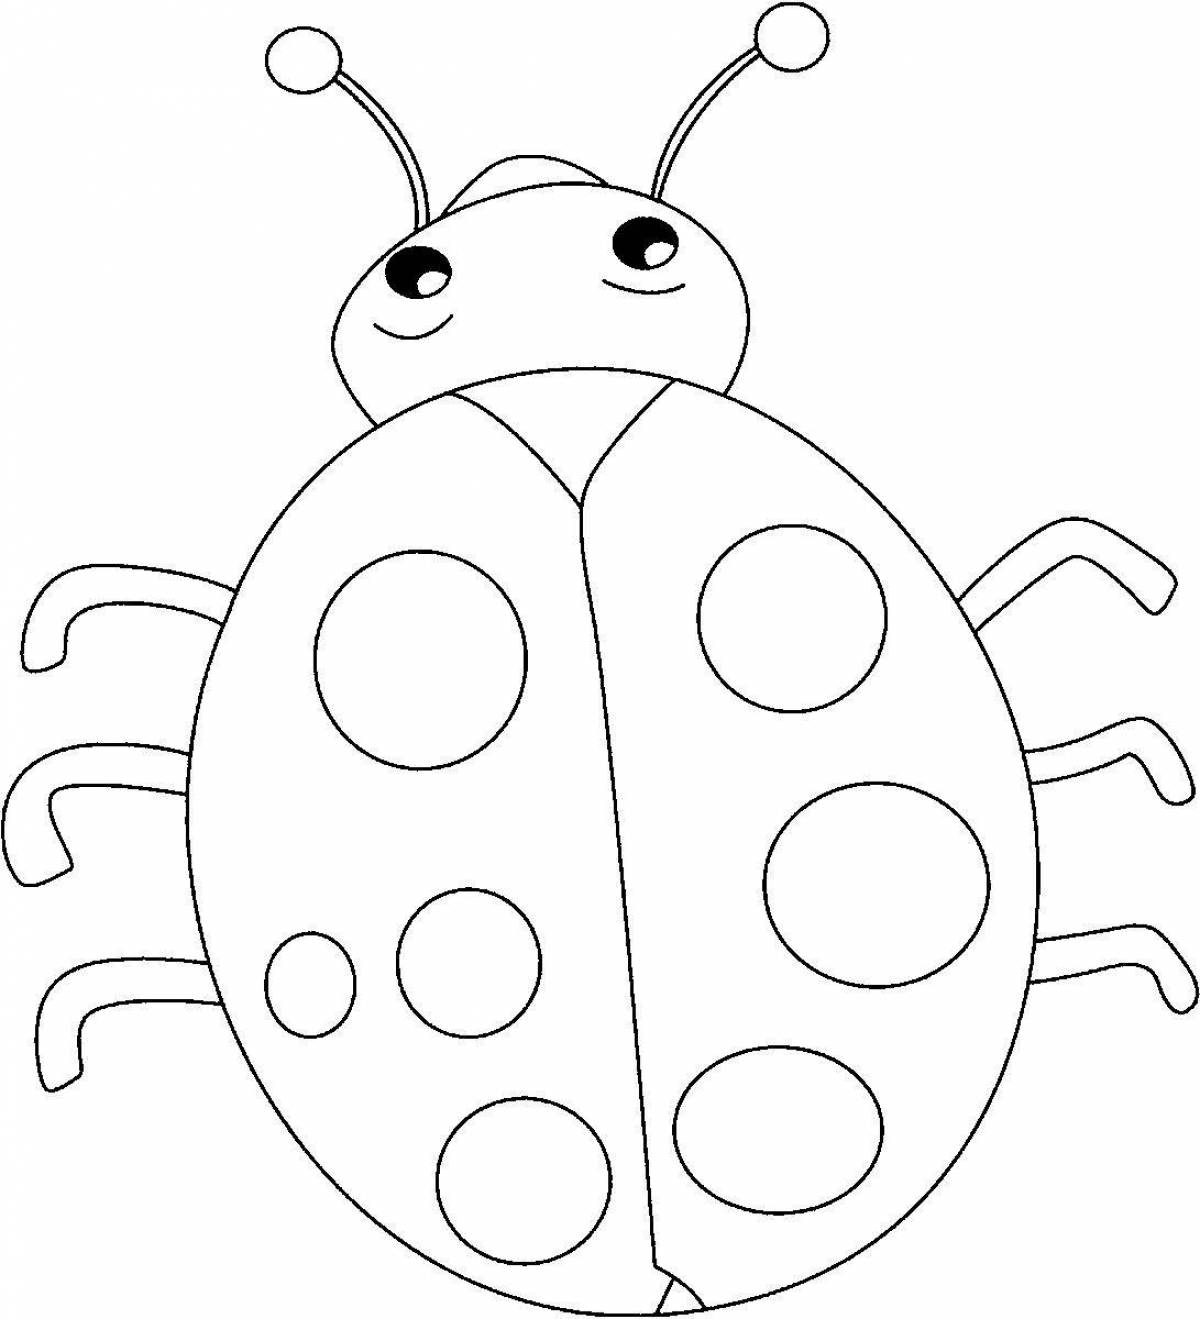 Exquisite ladybug coloring book for kids